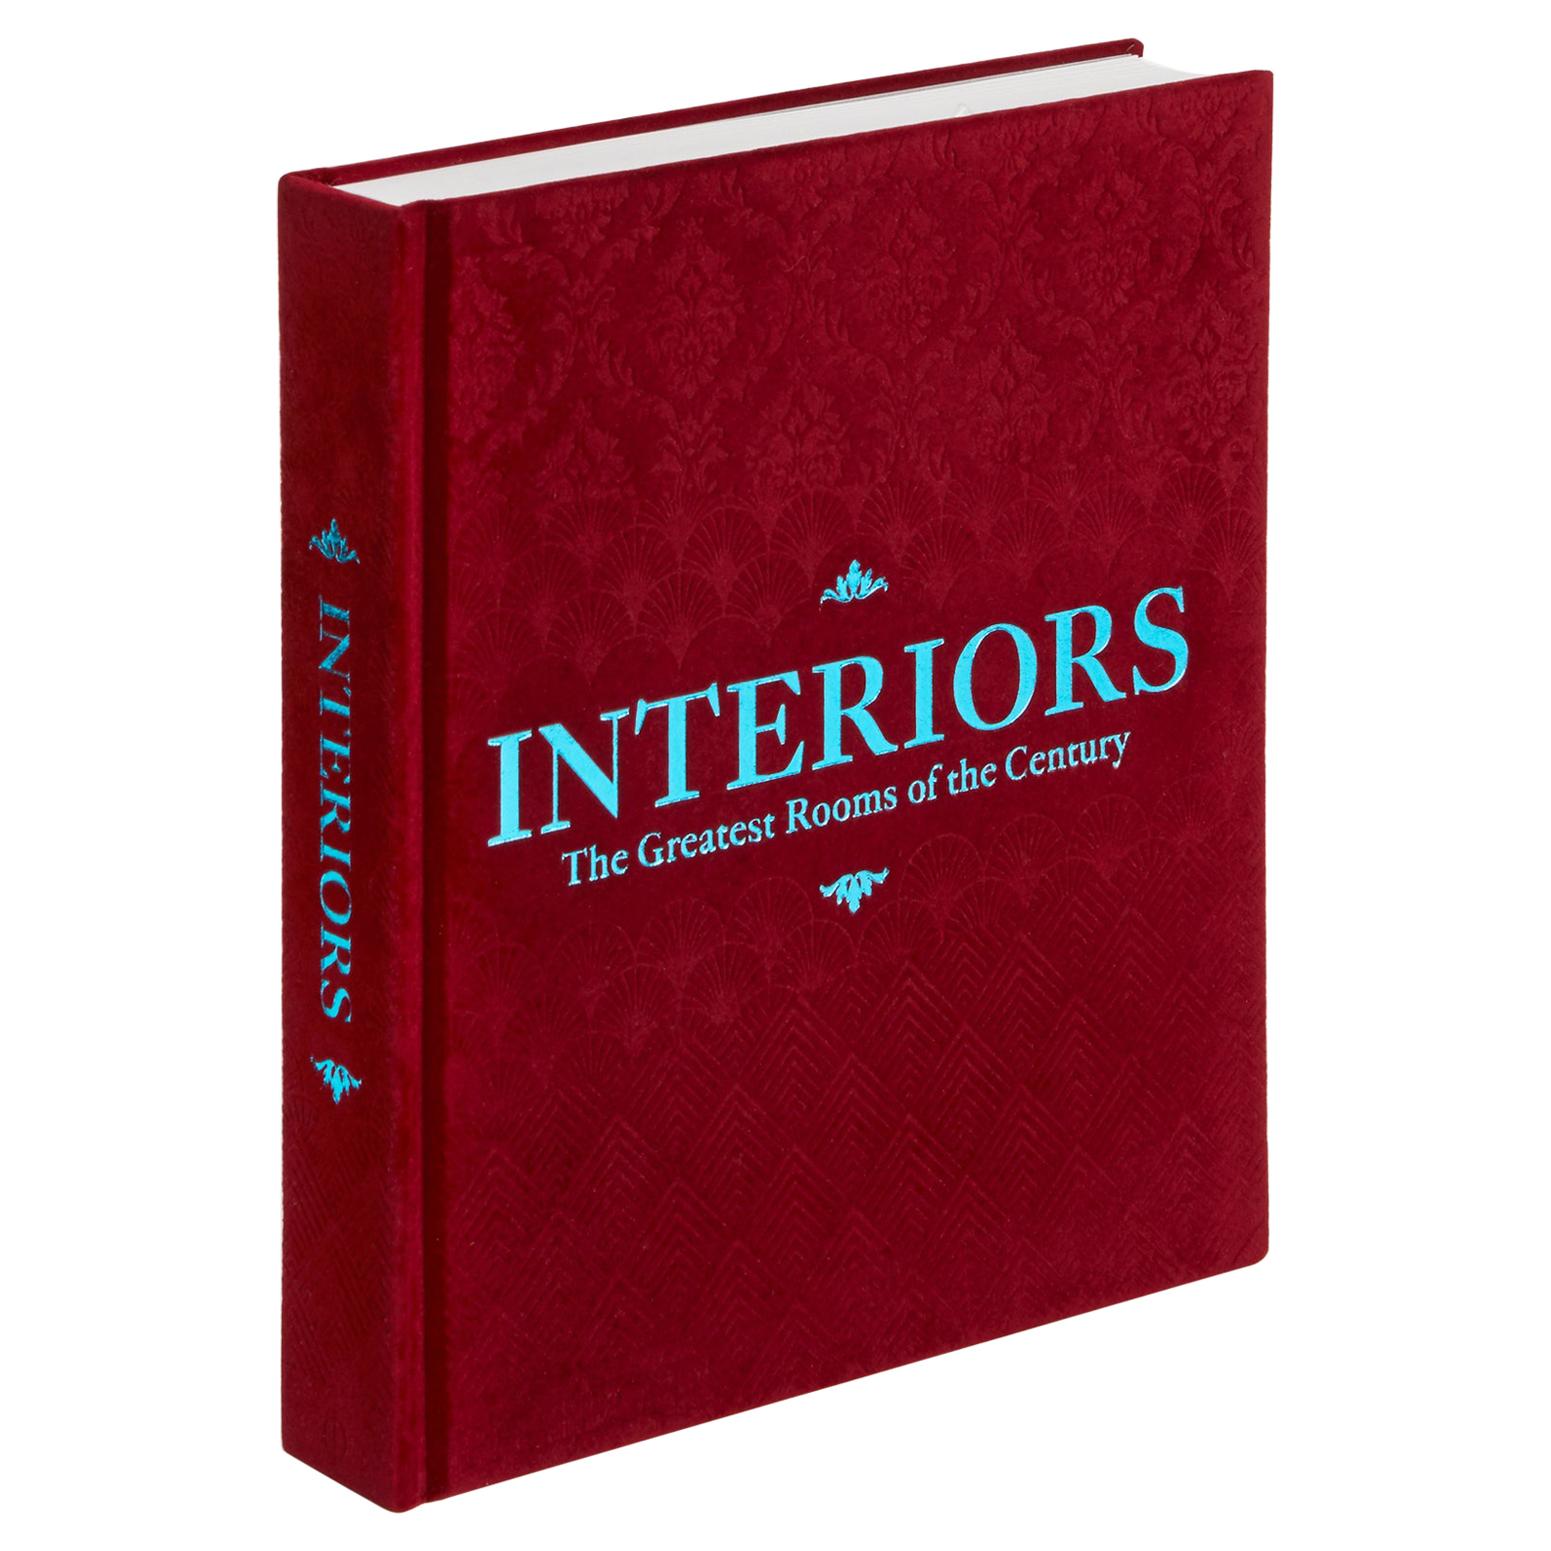 "Interiors The Greatest Rooms of the Century" 'Merlot Red' Book For Sale